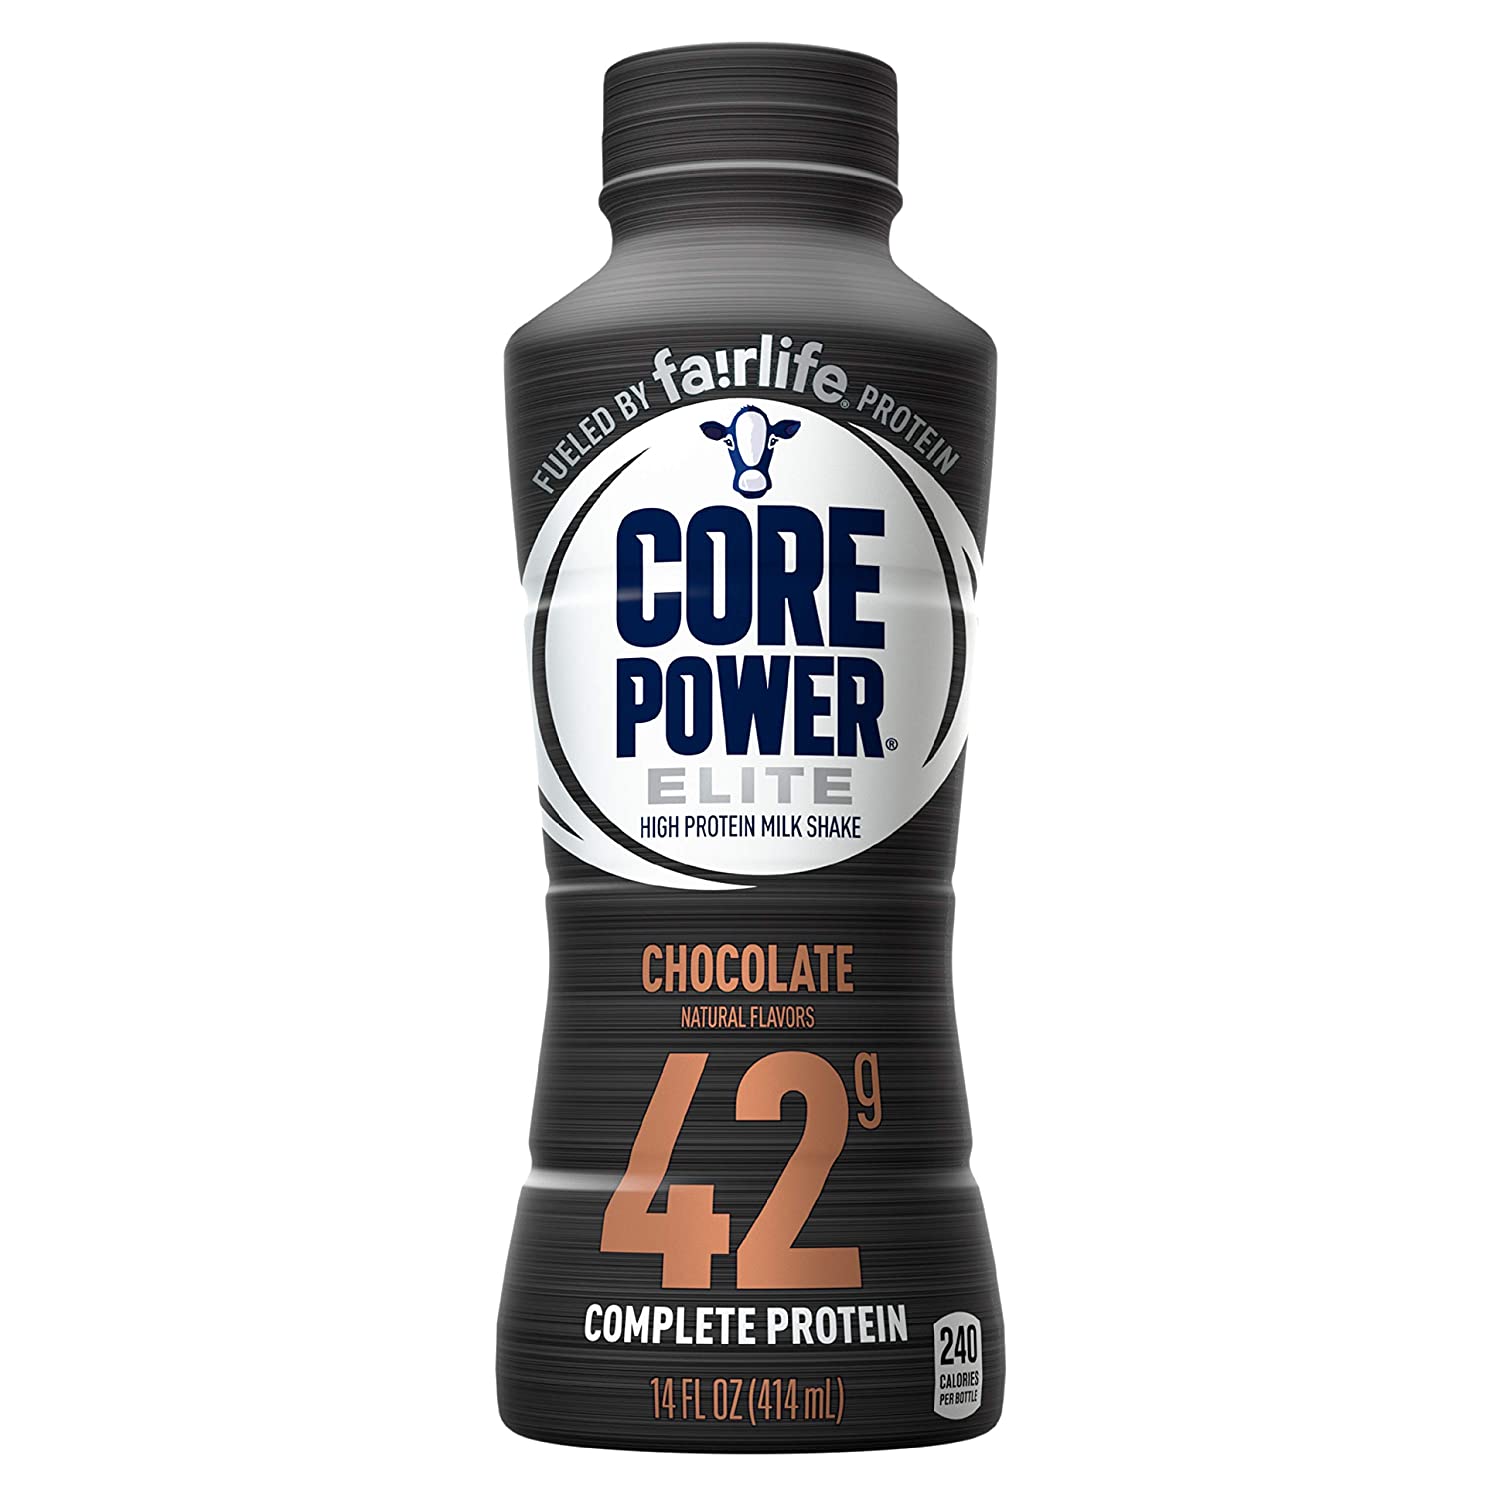 Fairlife Core Power (42g) High Protein Shake, Elite Chocolate / 414ml, SNS Health, Sports Nutrition